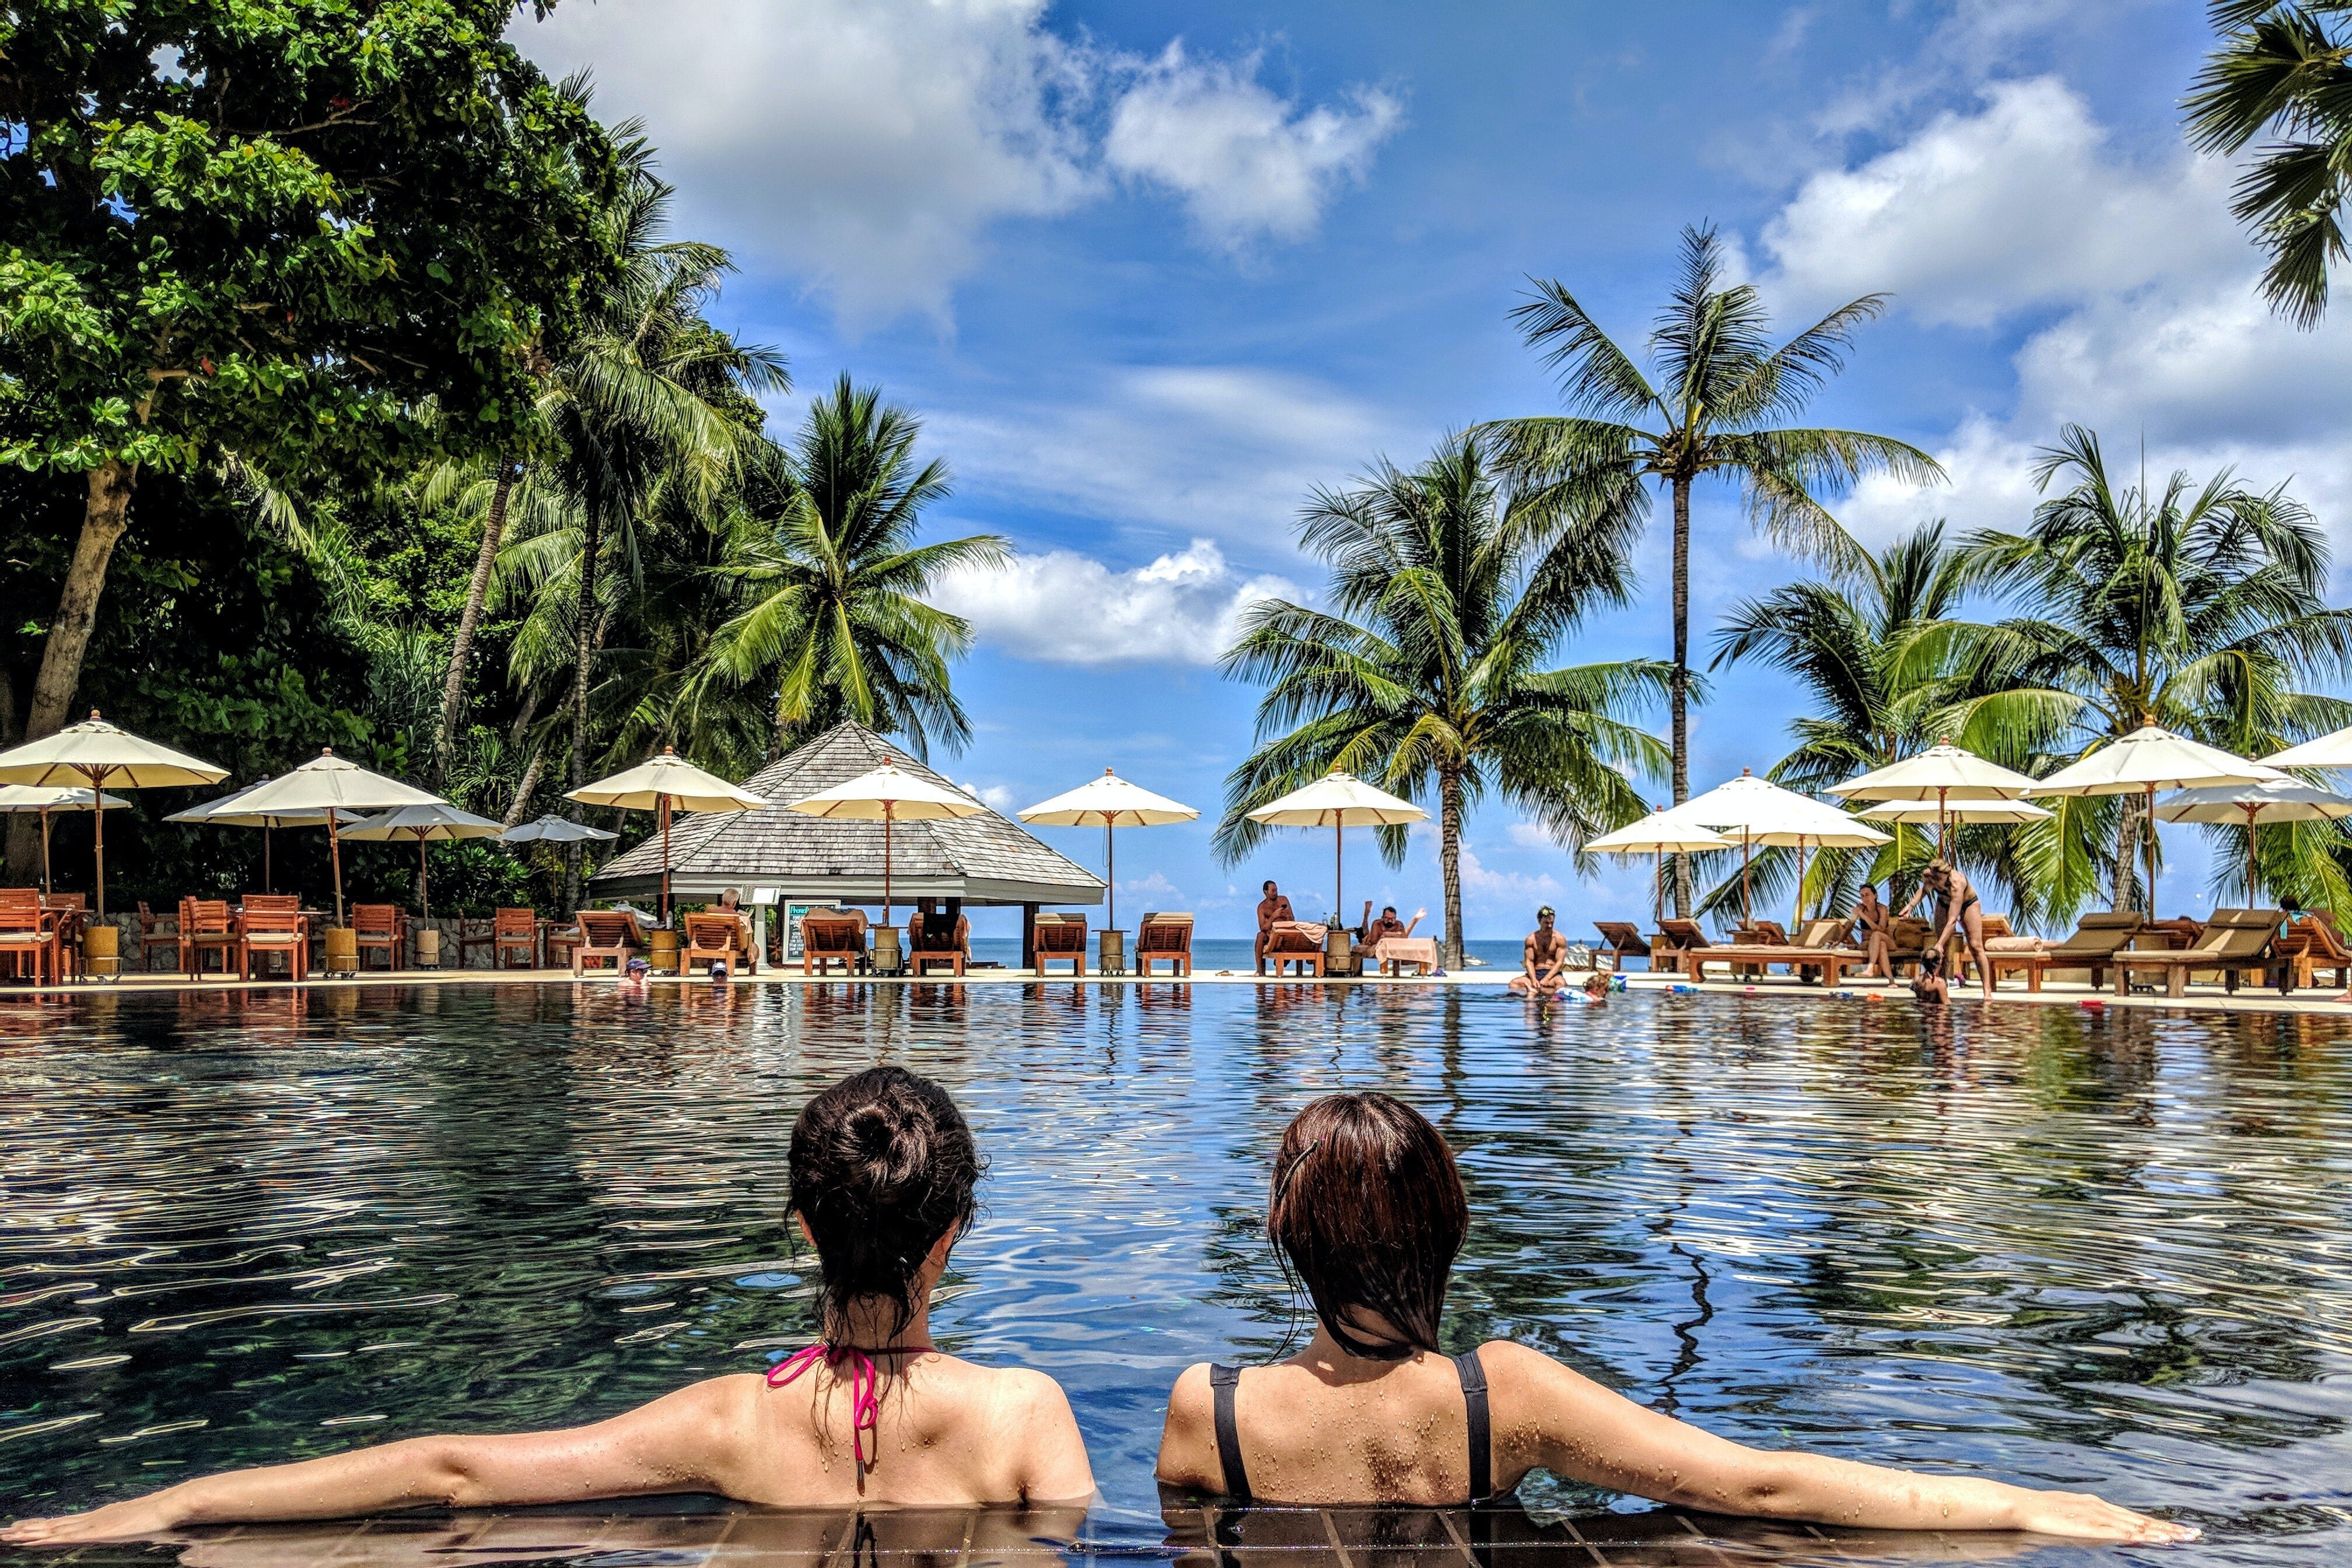 Two women in a pool with palm trees.